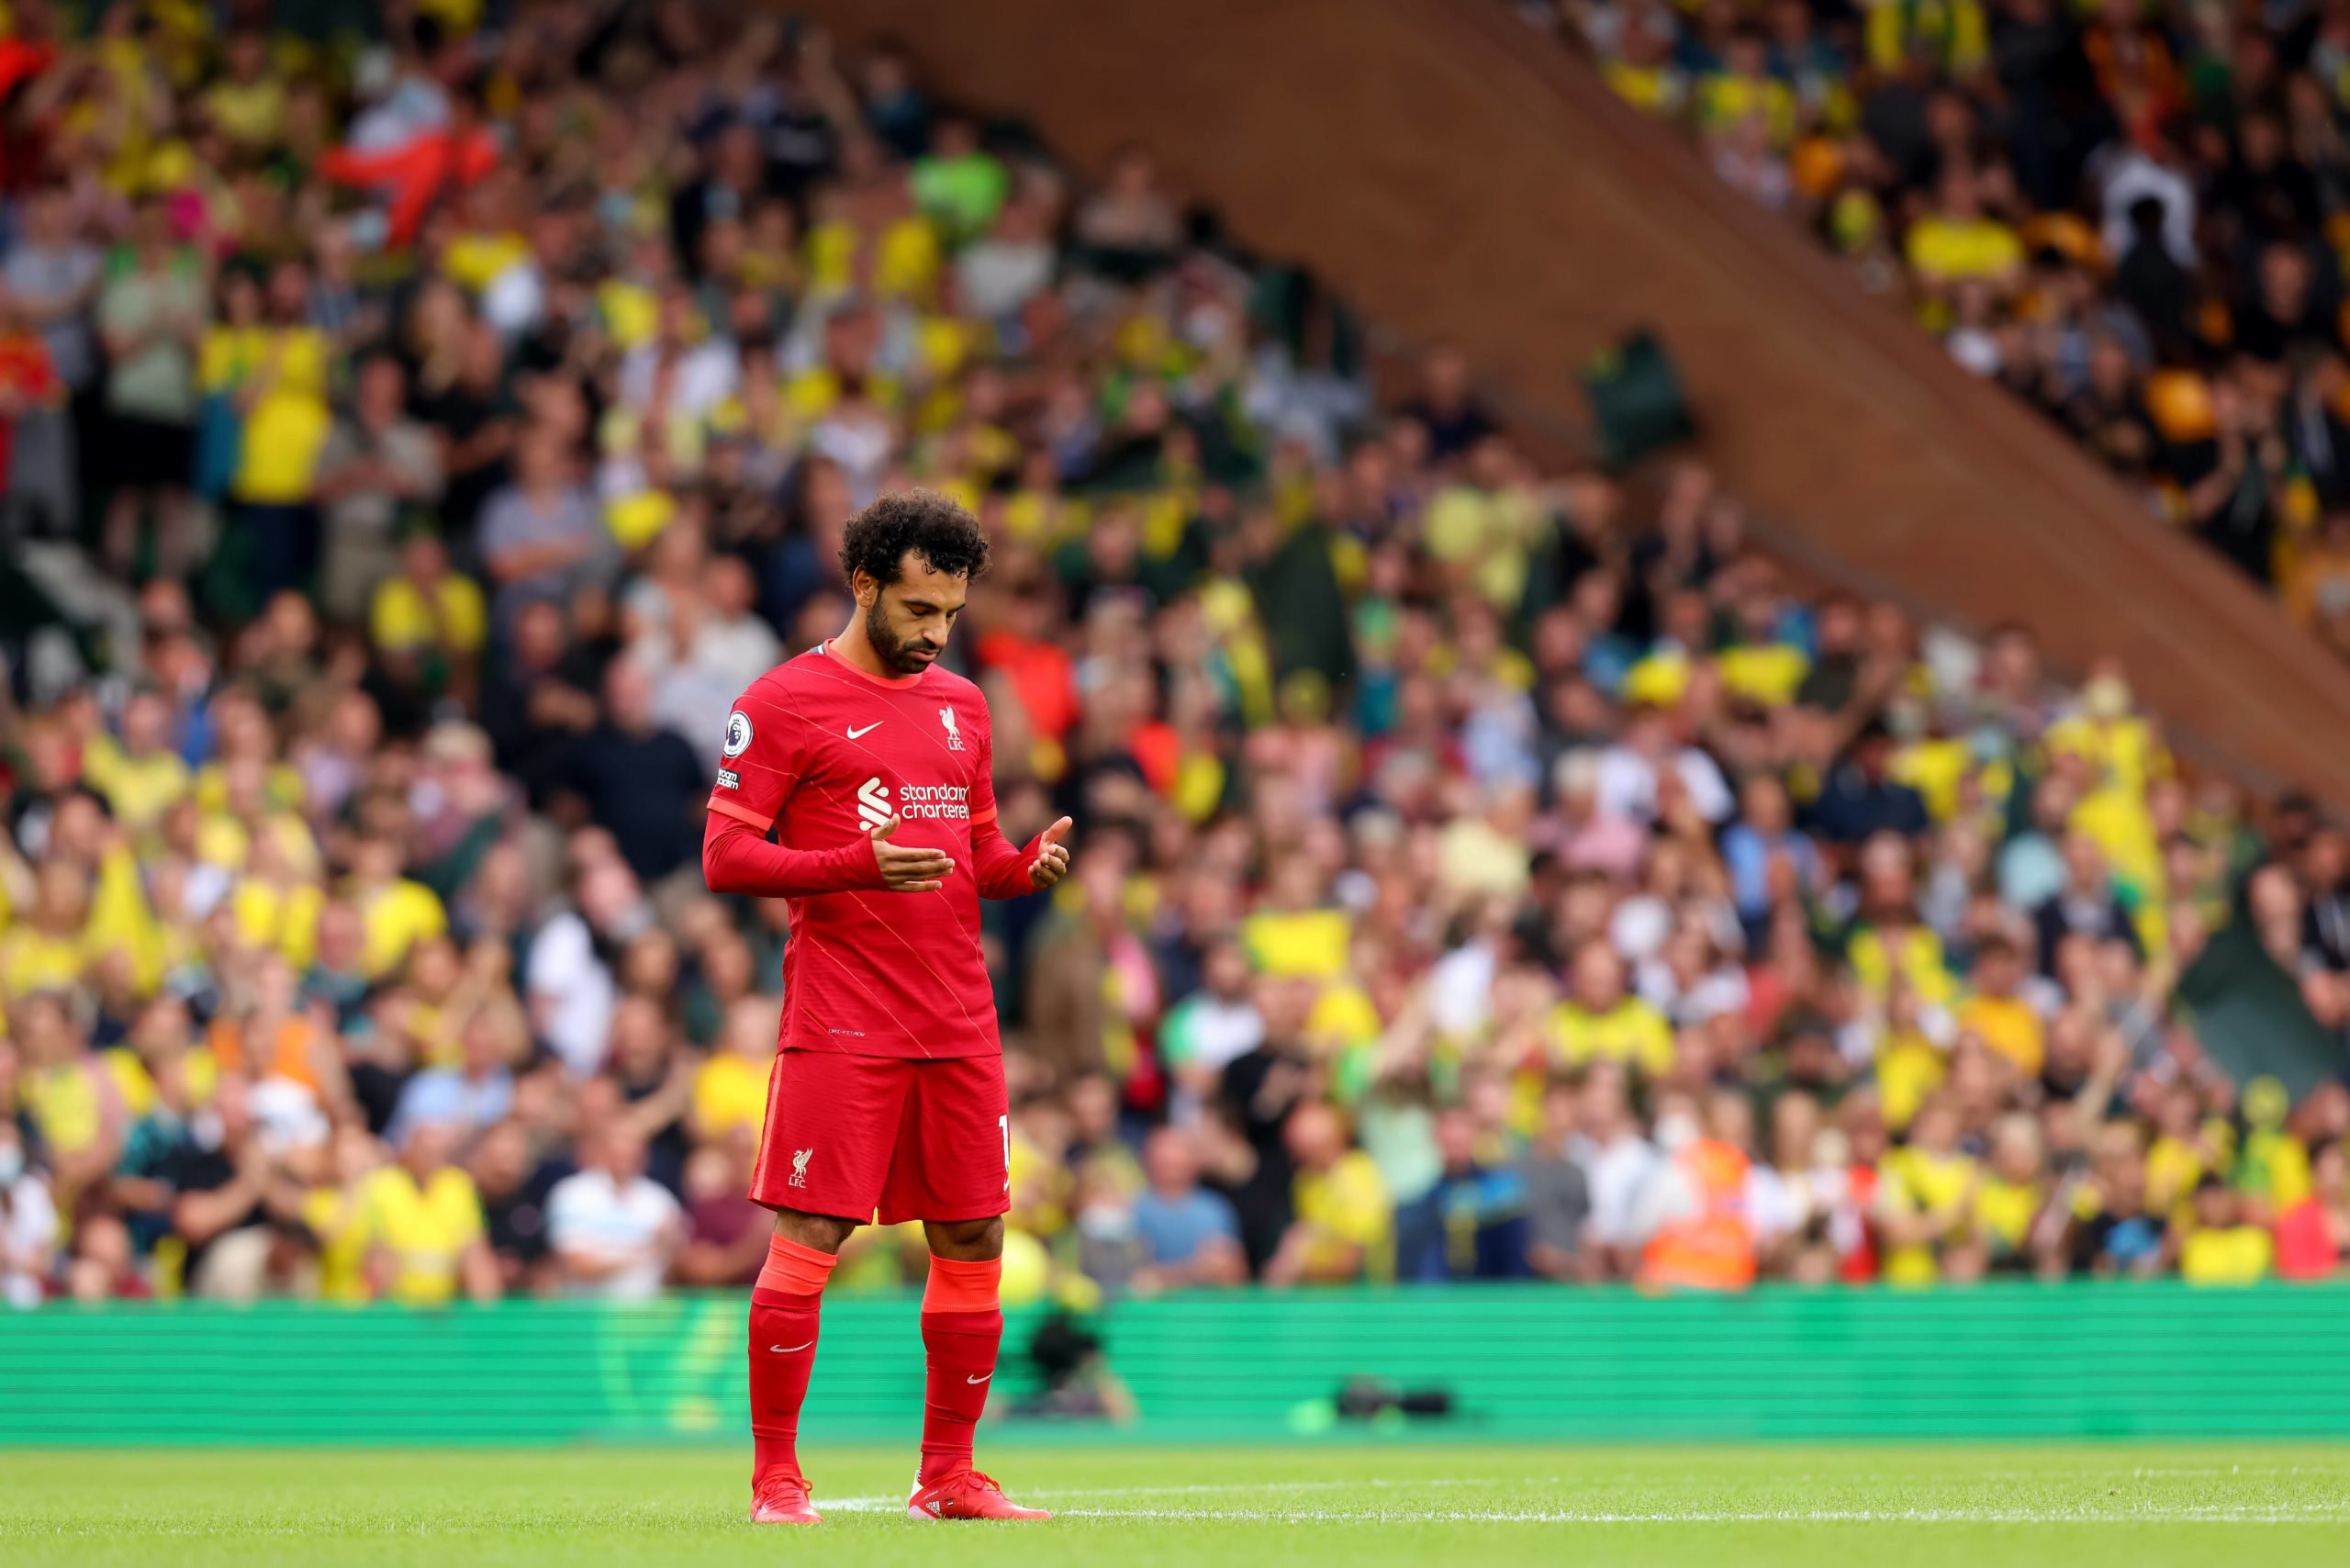 Update on Salah's future amid Real Madrid interest (Salah is seen in the photo)